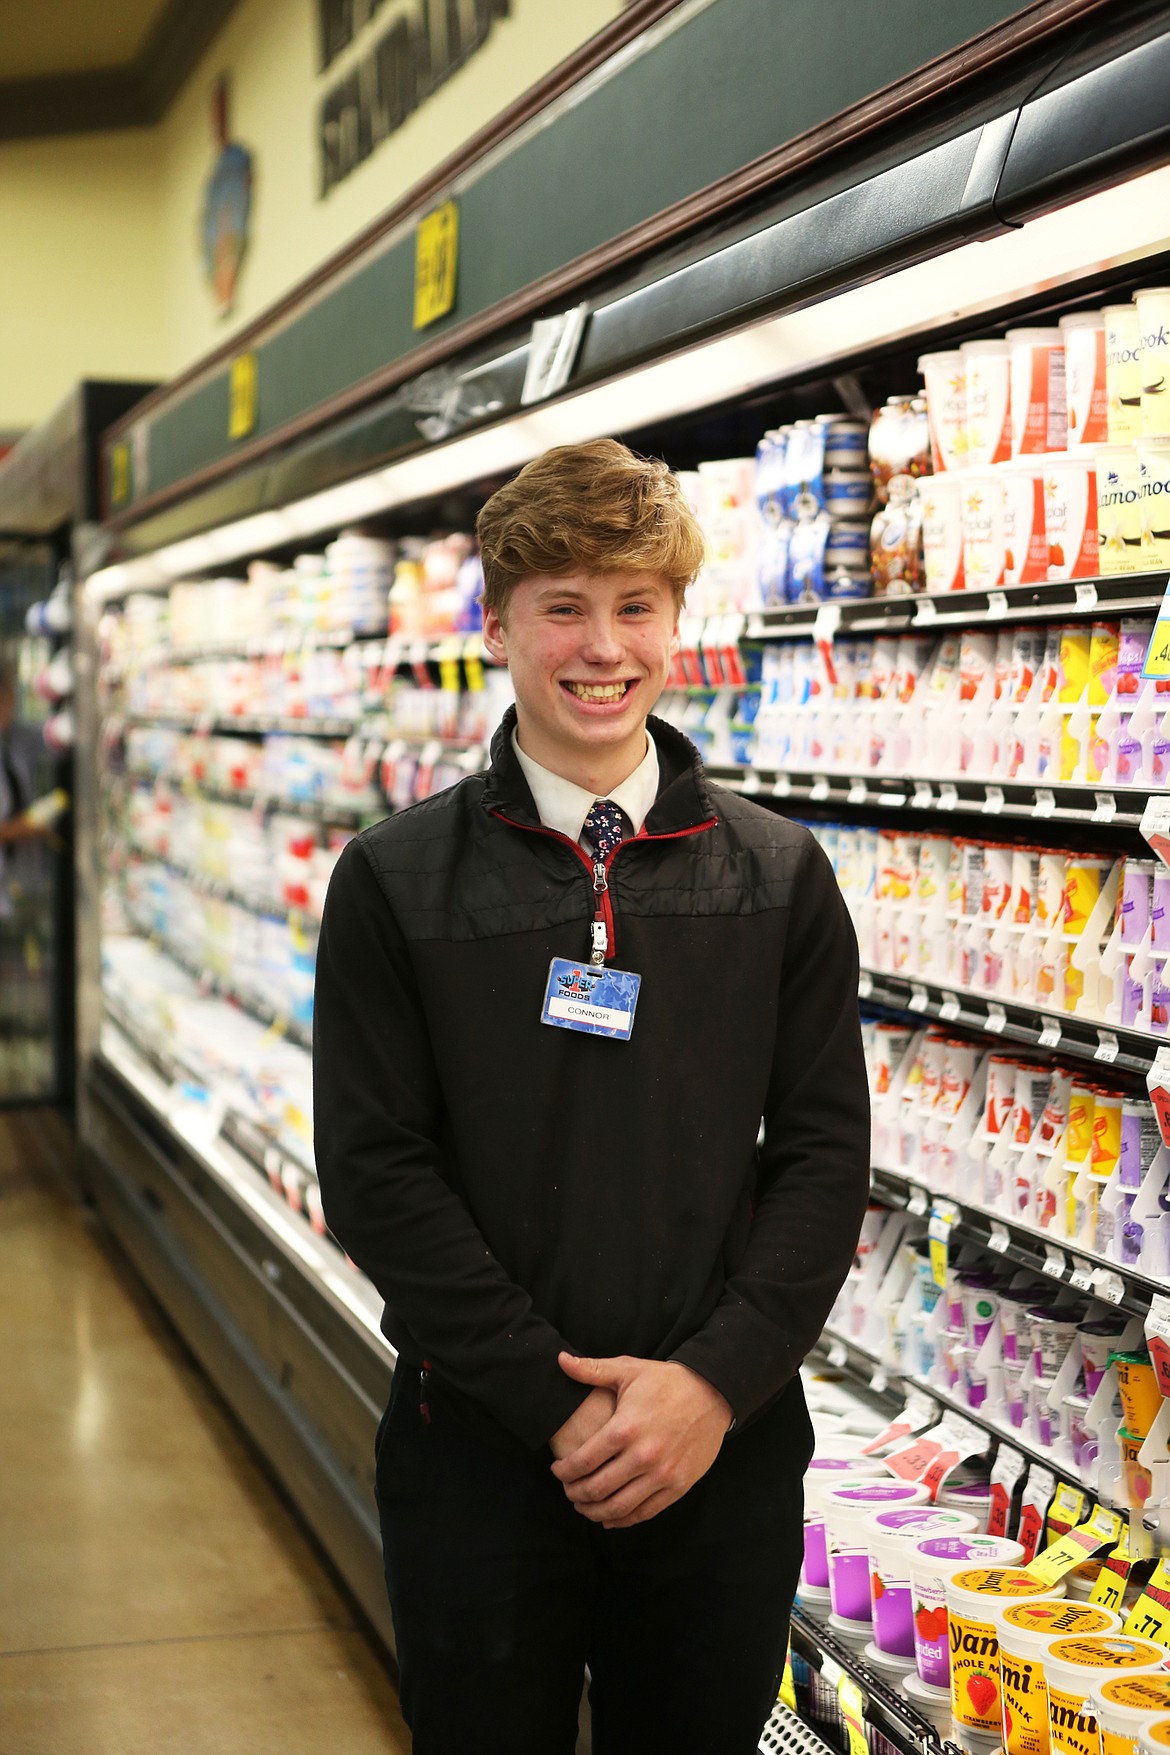 Connor Wride, a dairy stocker at Super One Foods is pictured in front of the diary display at Super One in Kalispell. (Mackenzie Reiss/Daily Inter Lake)